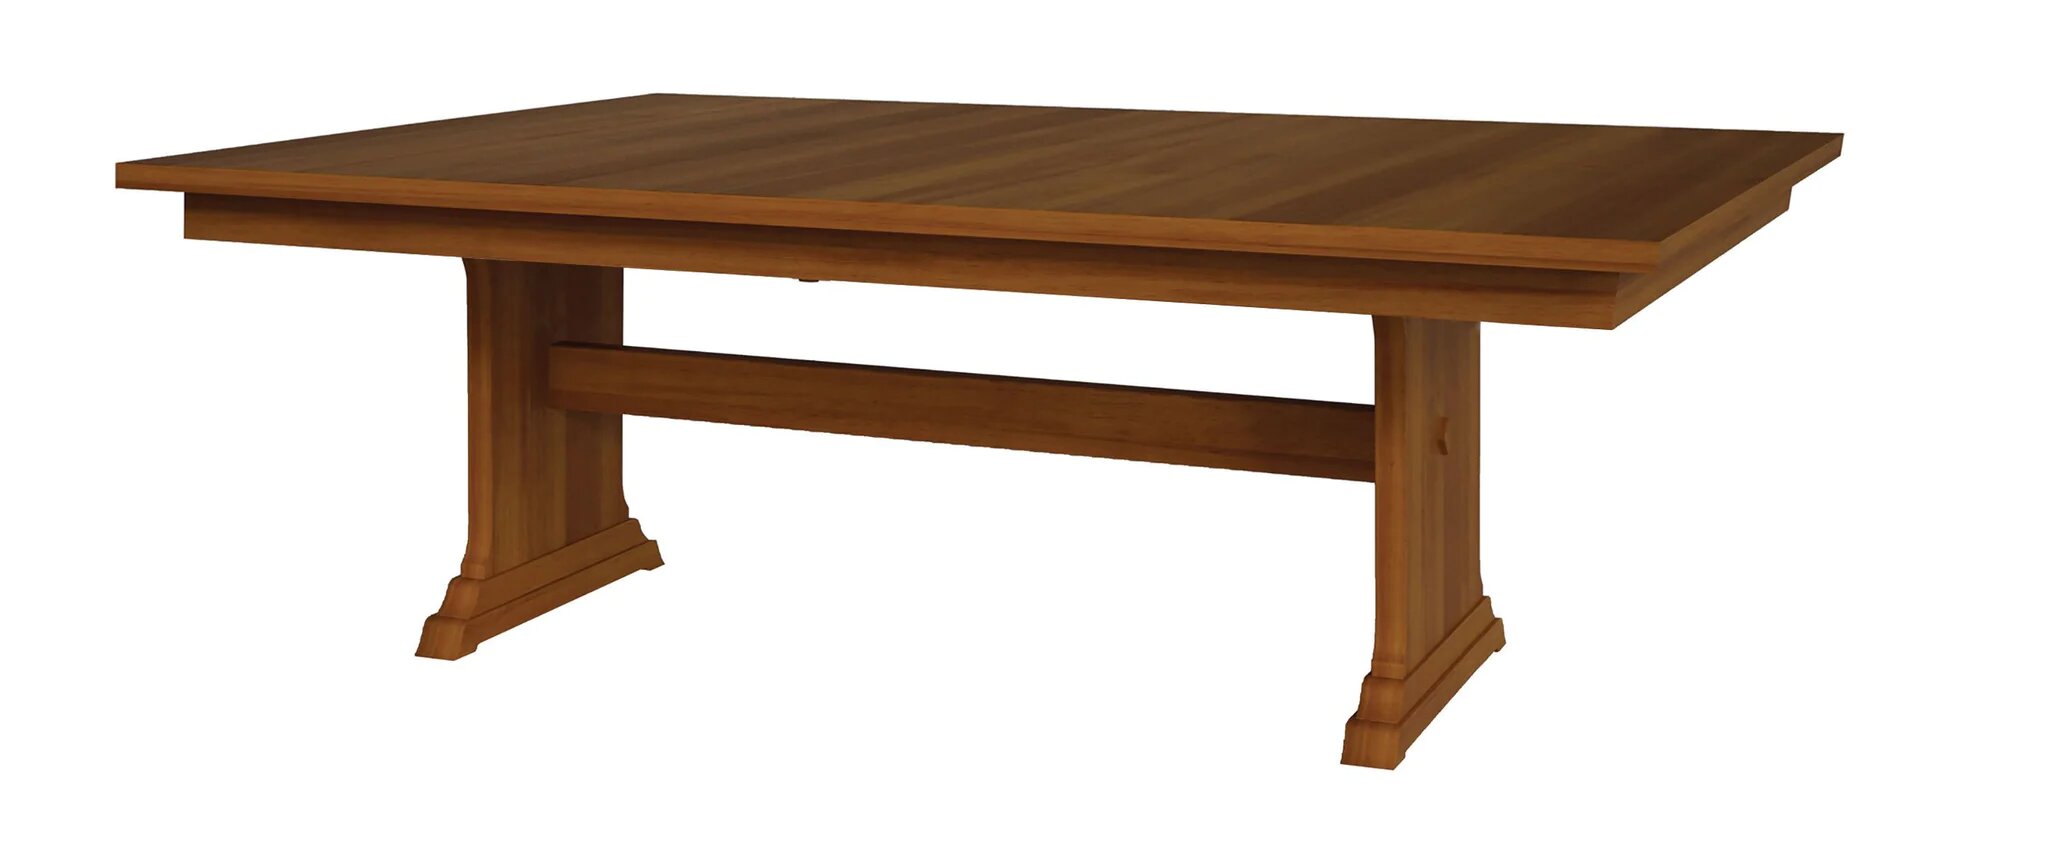 amish hoover double pedestal table